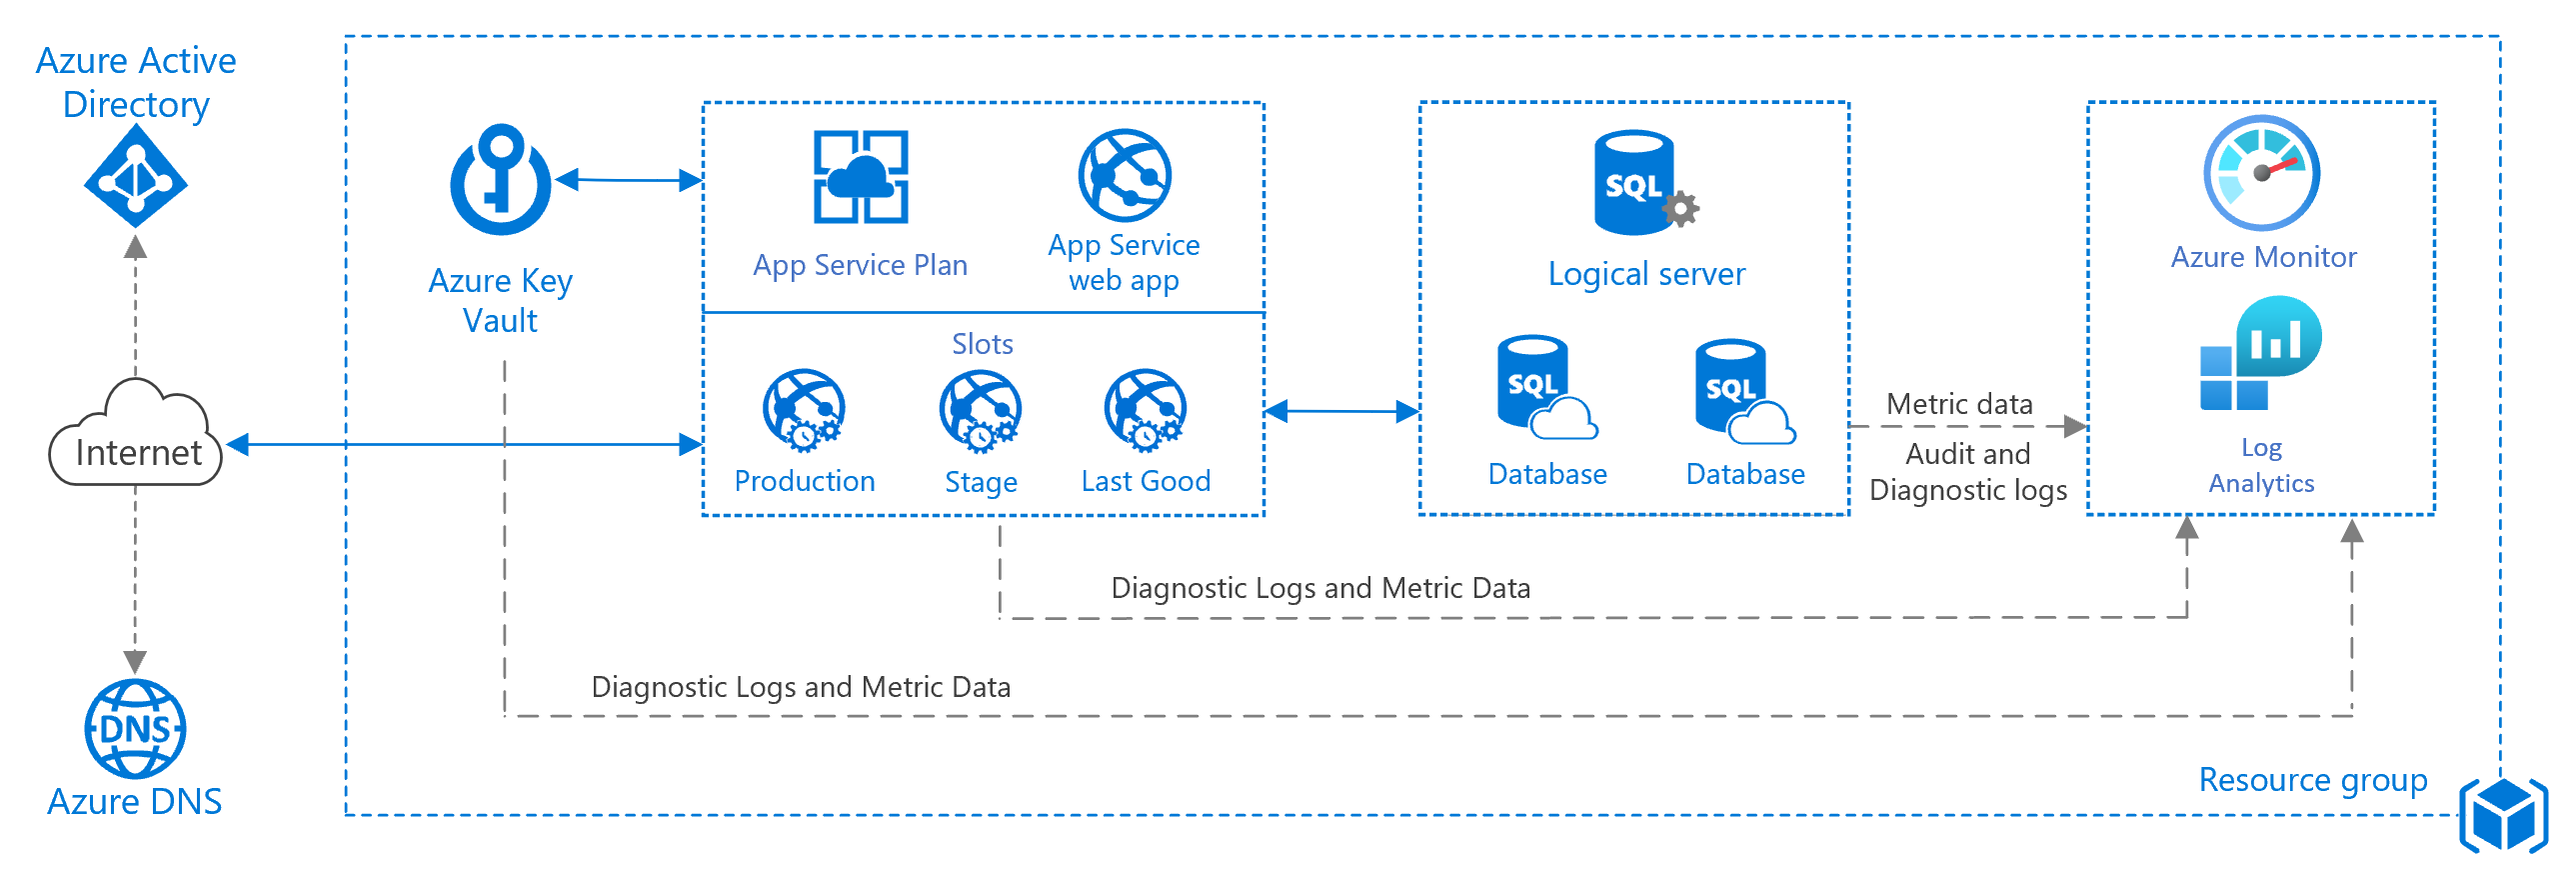 Basic web app archtecture with Azure App Service